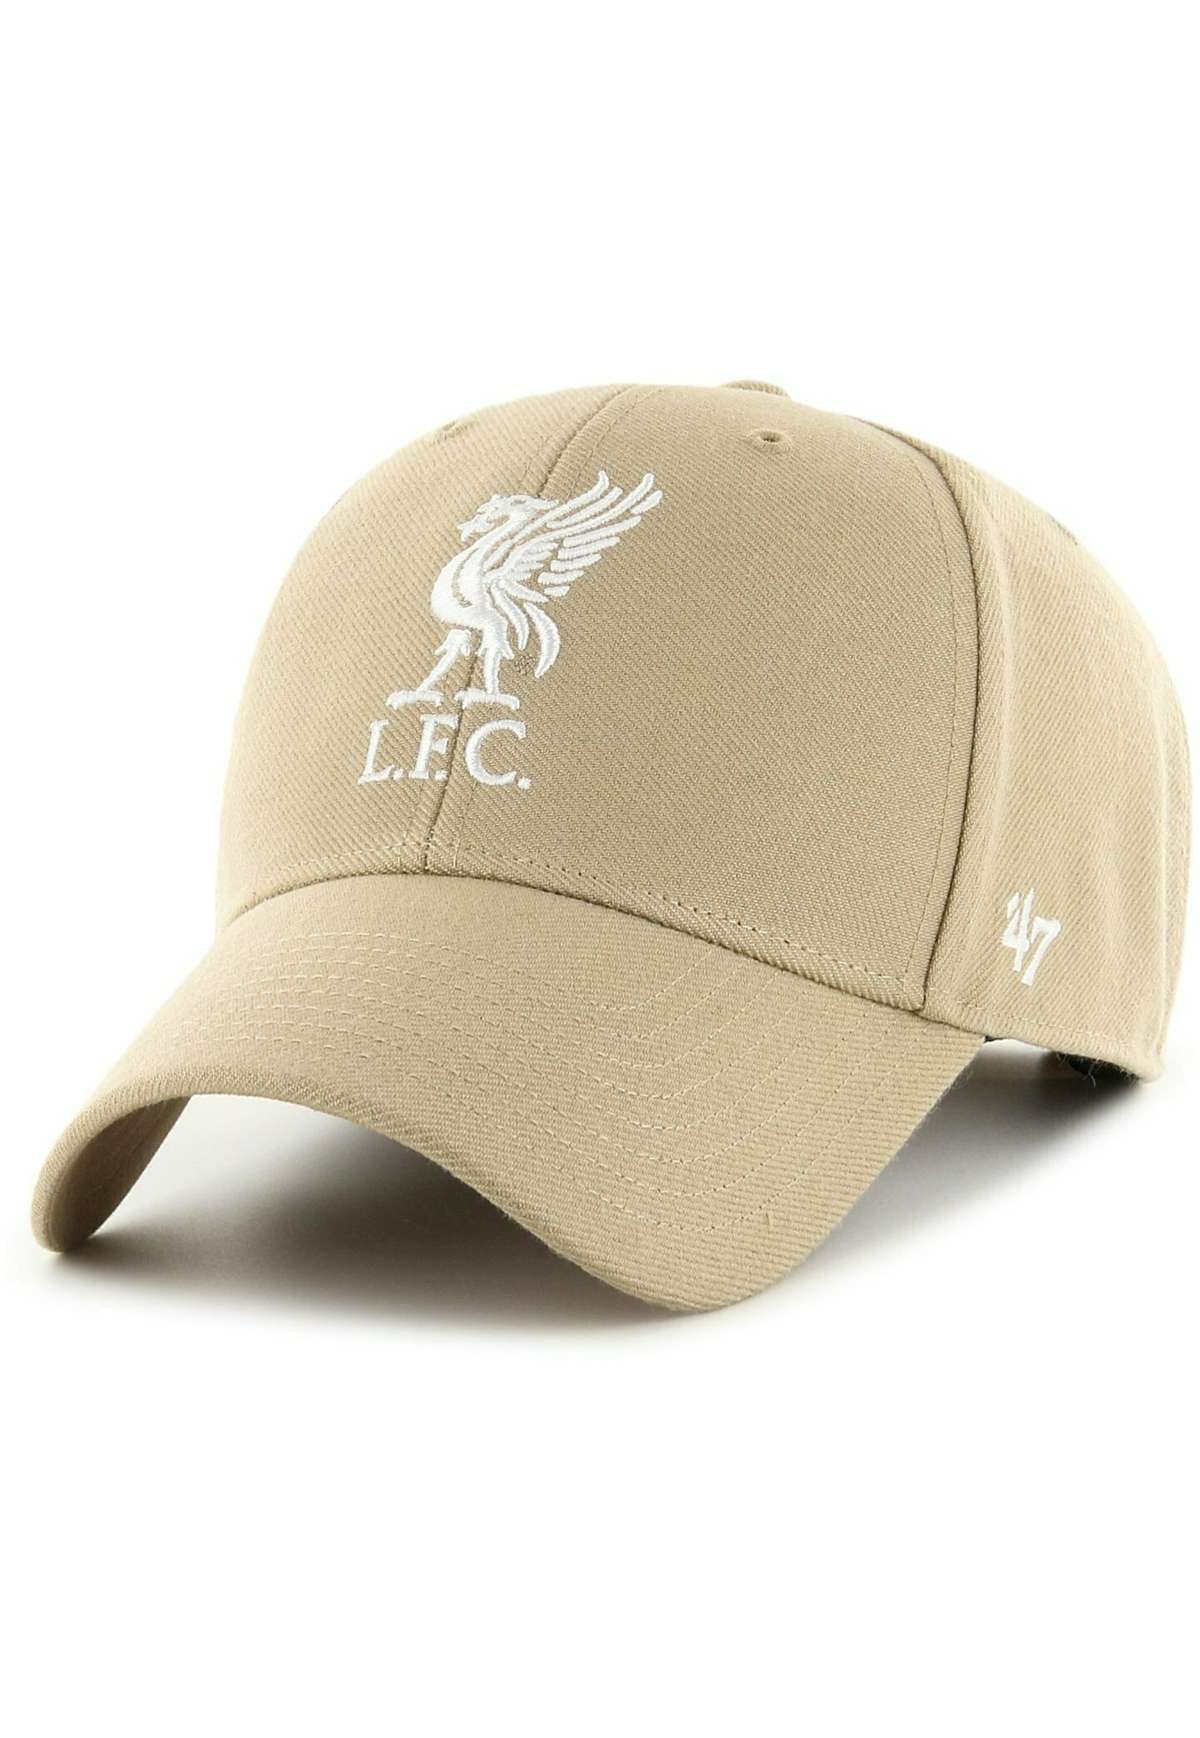 Кепка RELAXED FIT FC LIVERPOOL